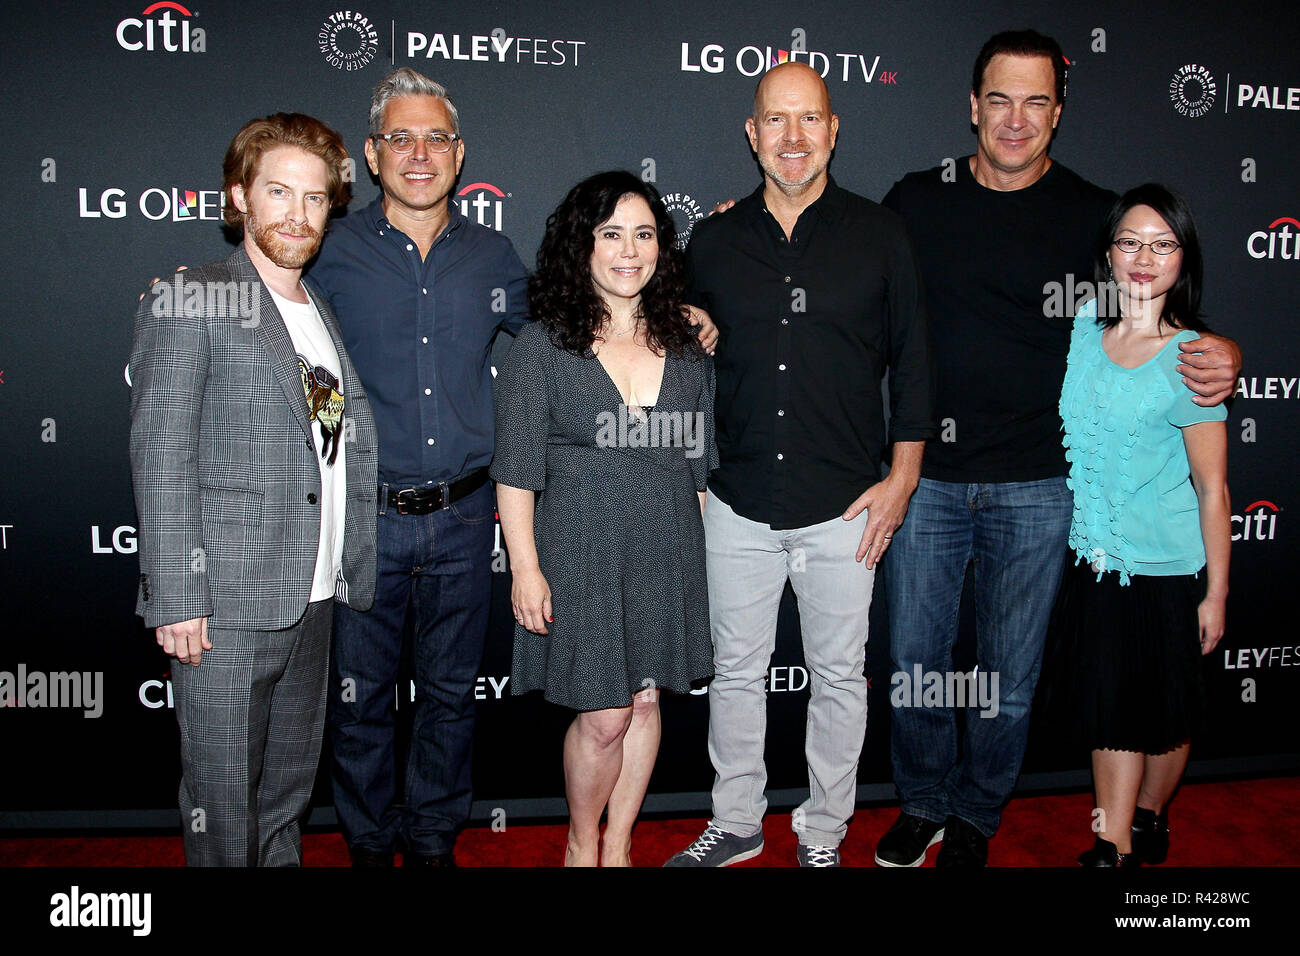 NEW YORK, NY - OCTOBER 07:  Actor Seth Green, writer/producer Richard Appel, actors Alex Borstein, Mike Henry, Patrick Warburton and moderator Cherry Chevapravatdumrong attend 'Family Guy' during the PaleyFest NY 2017 at The Paley Center for Media on October 7, 2017 in New York City.  (Photo by Steve Mack/S.D. Mack Pictures) Stock Photo